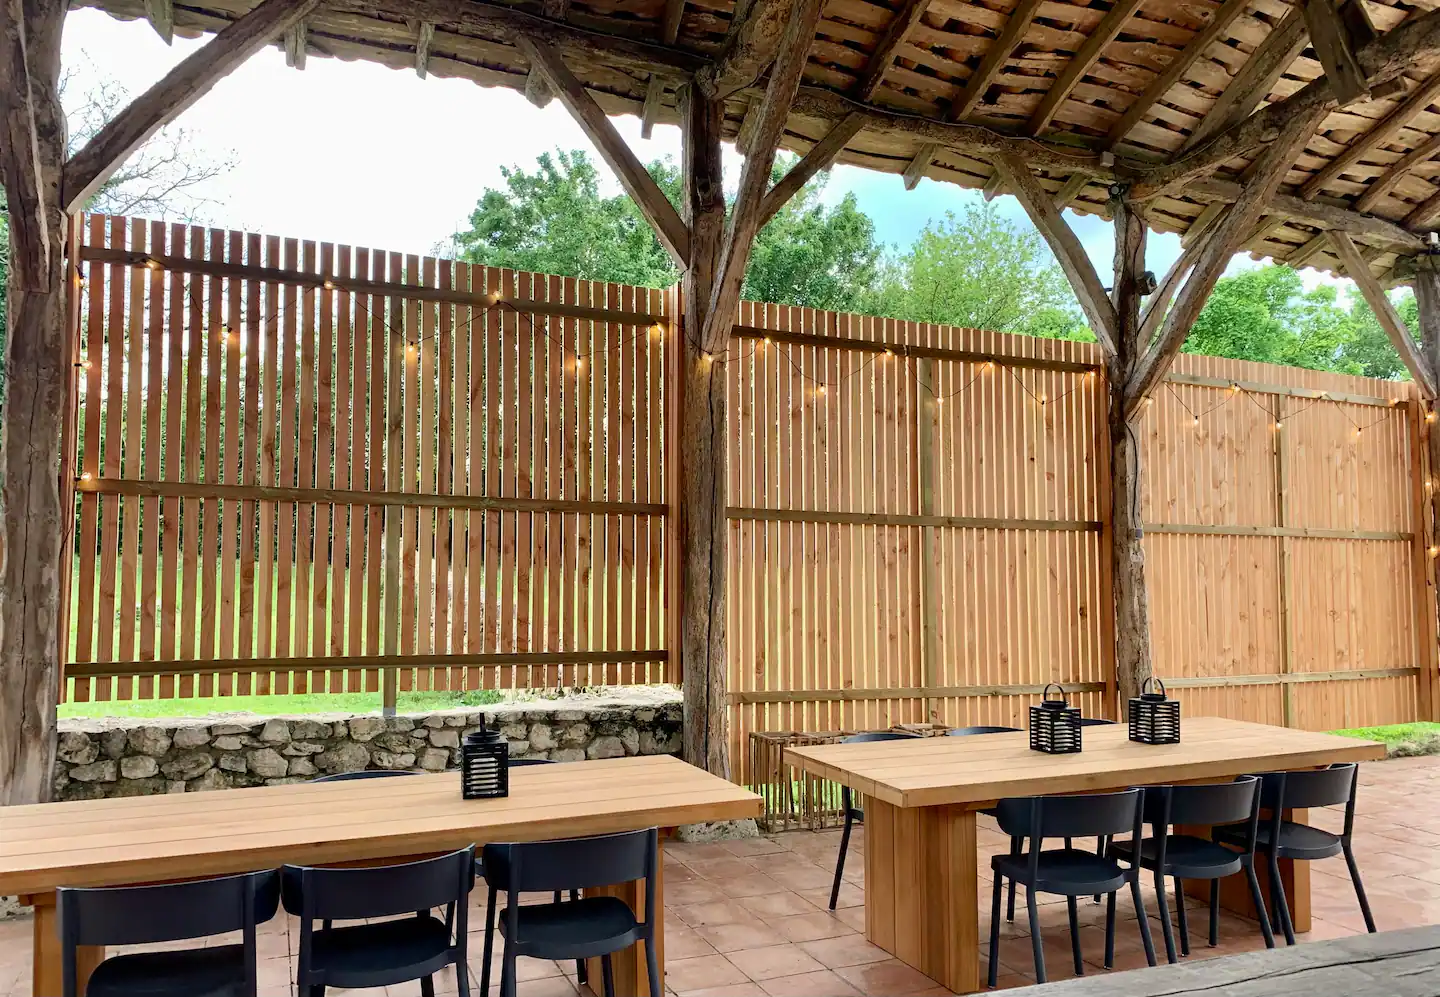 Breathe fresh air outside while eating in the outdoor dining area